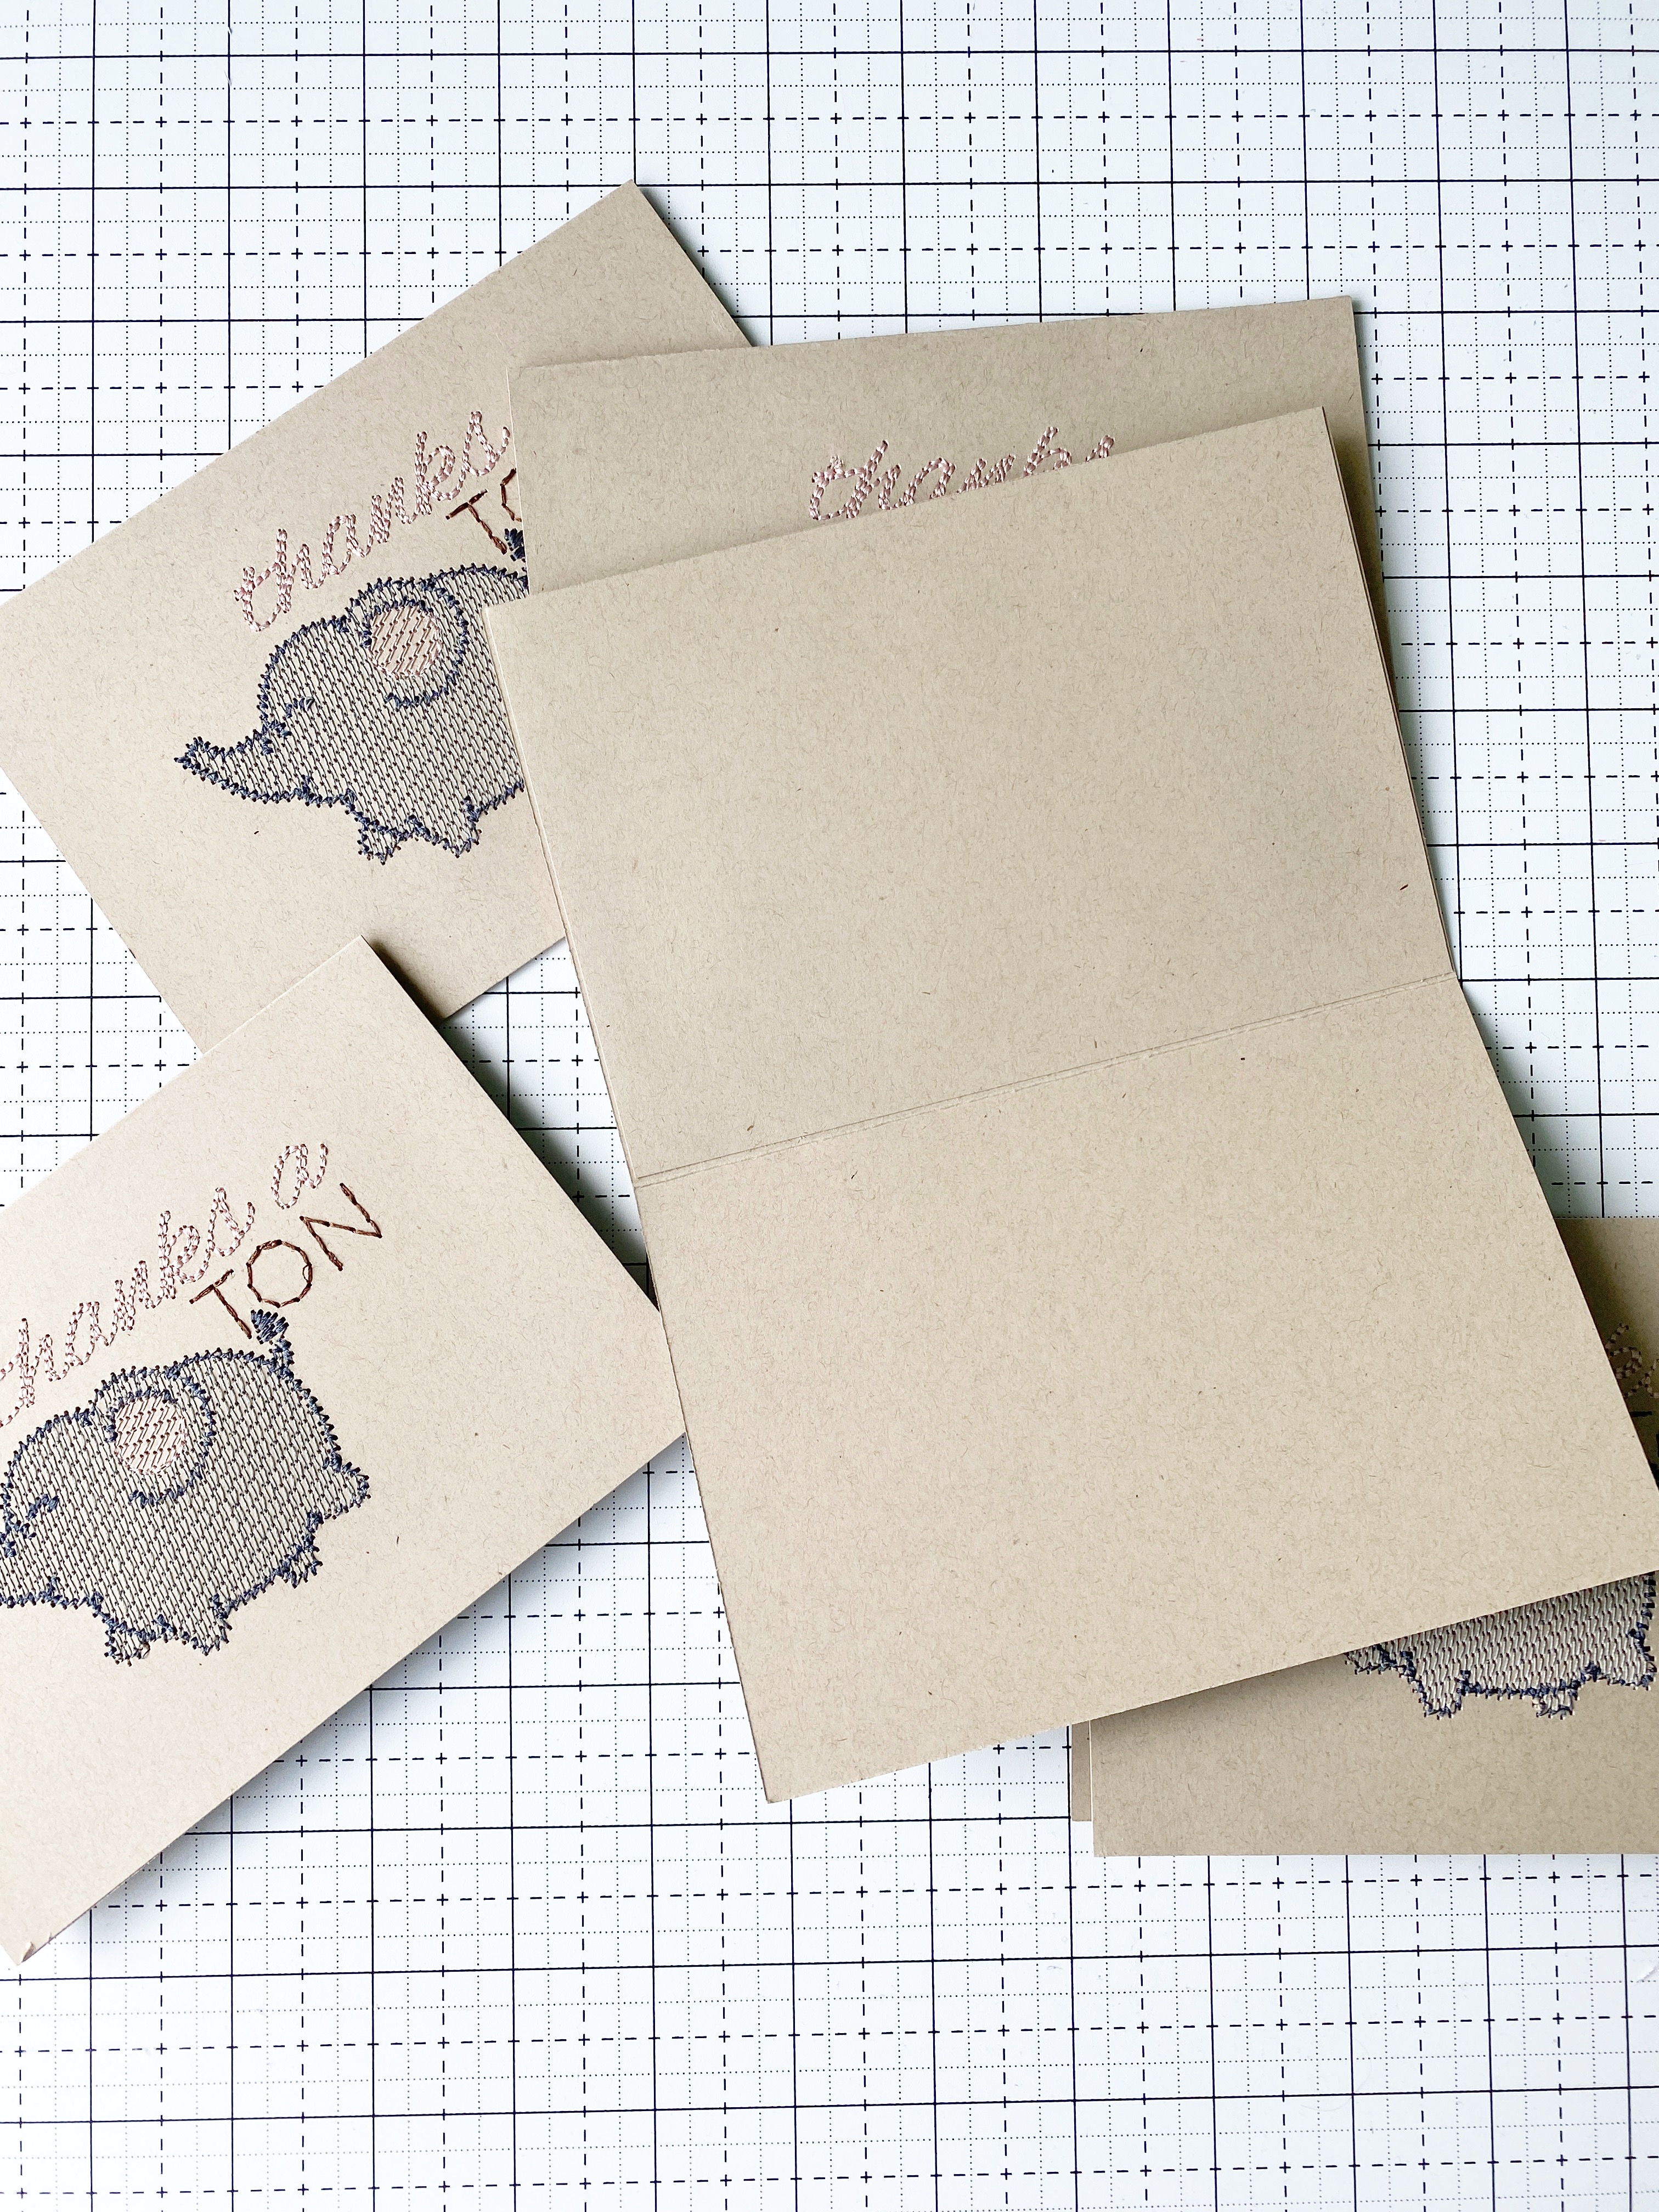 Embroidered Greeting Cards: Finish Cards